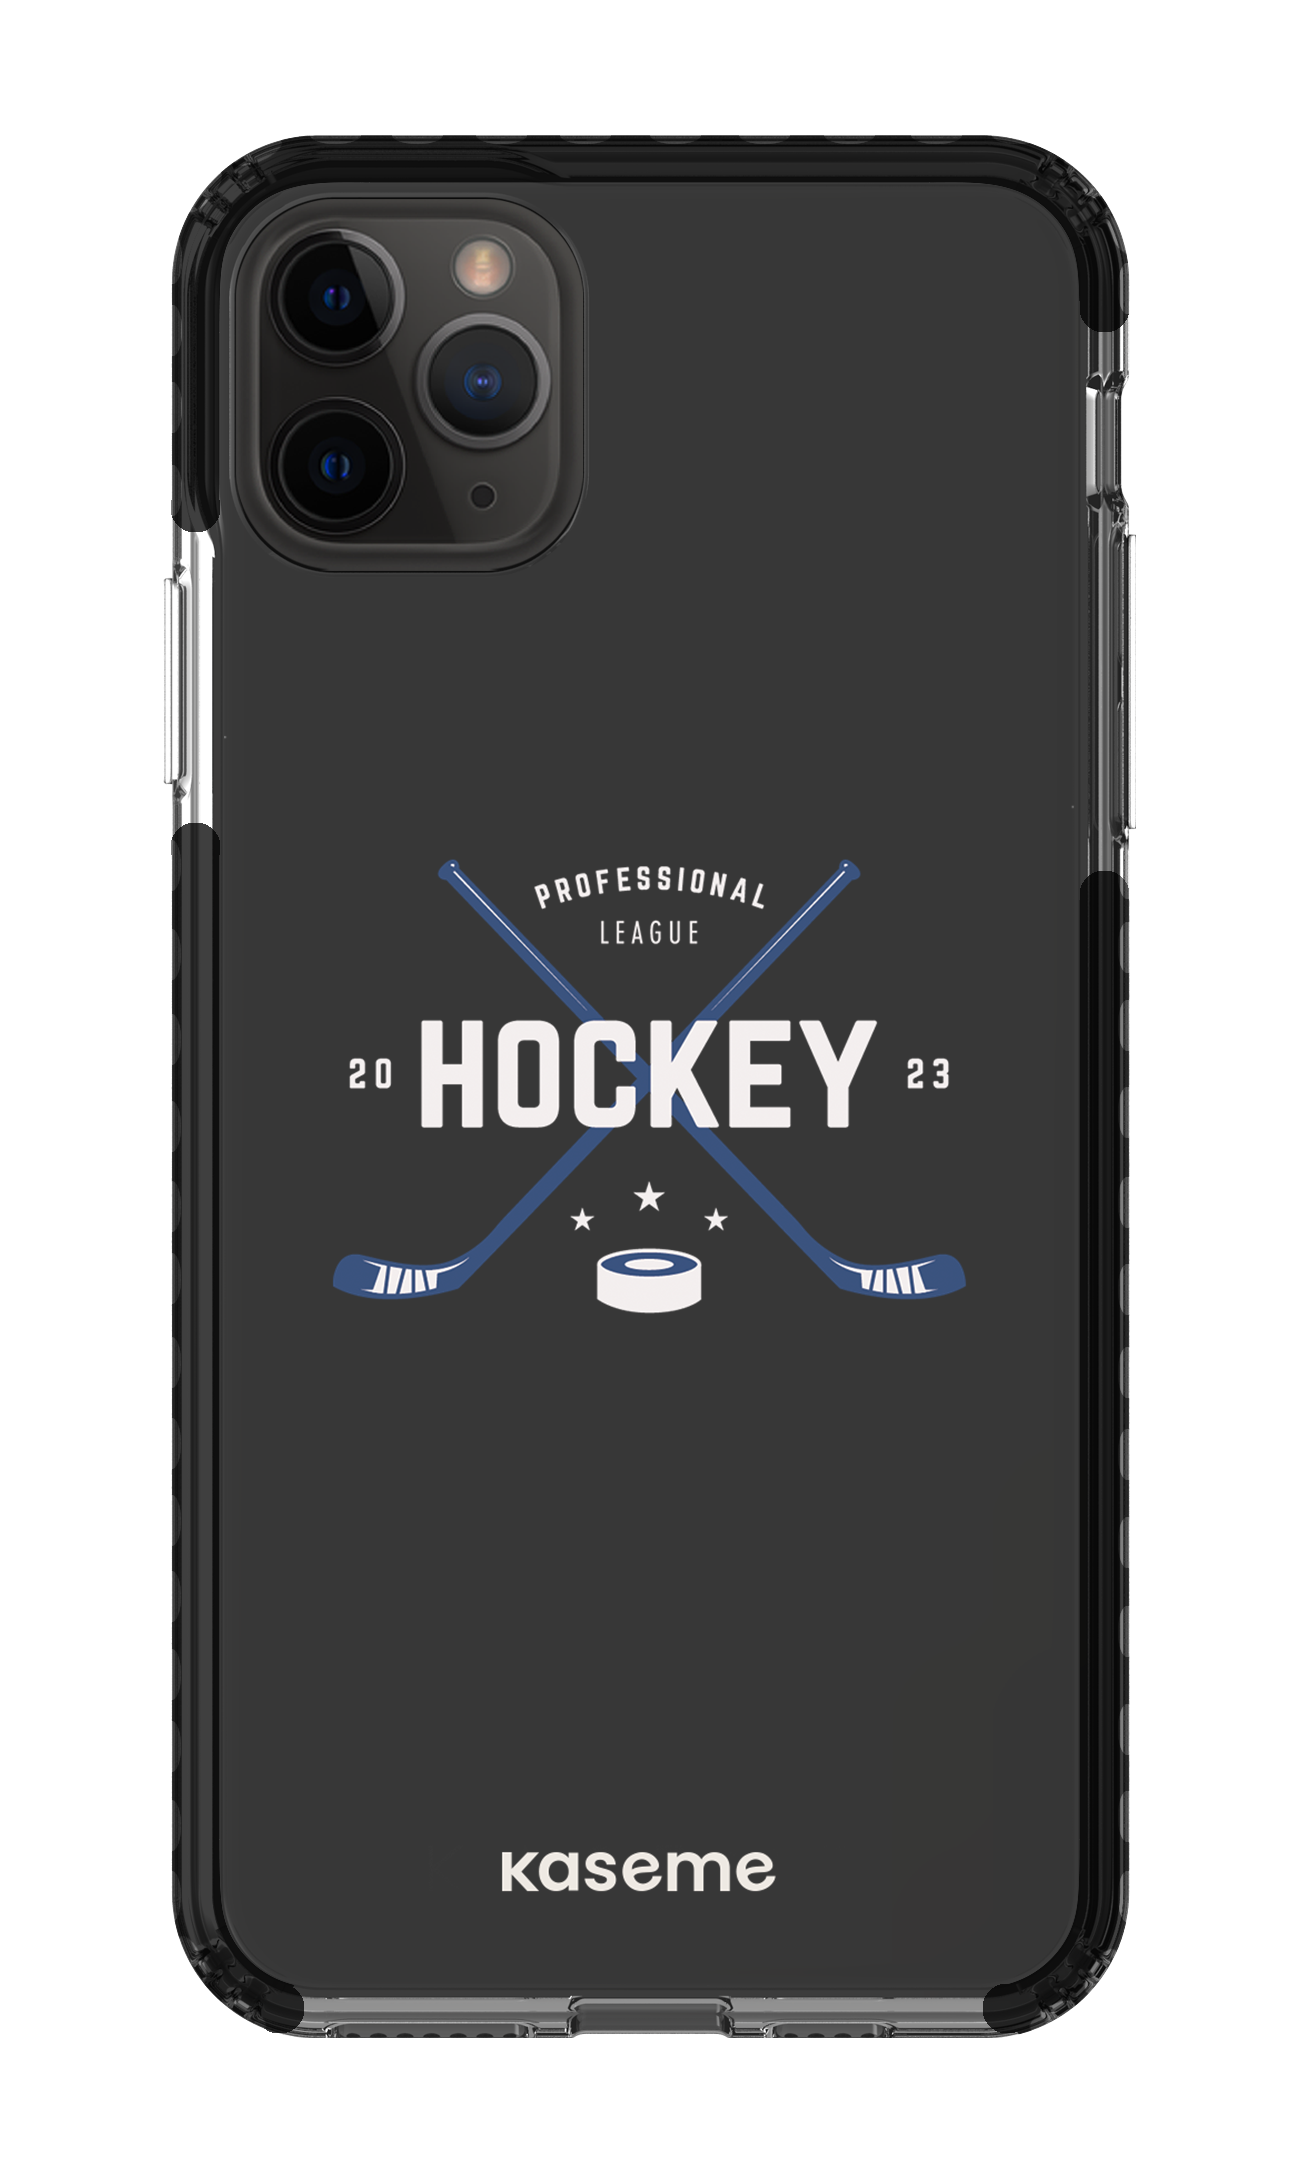 Playoffs clear case - iPhone 11 pro Max